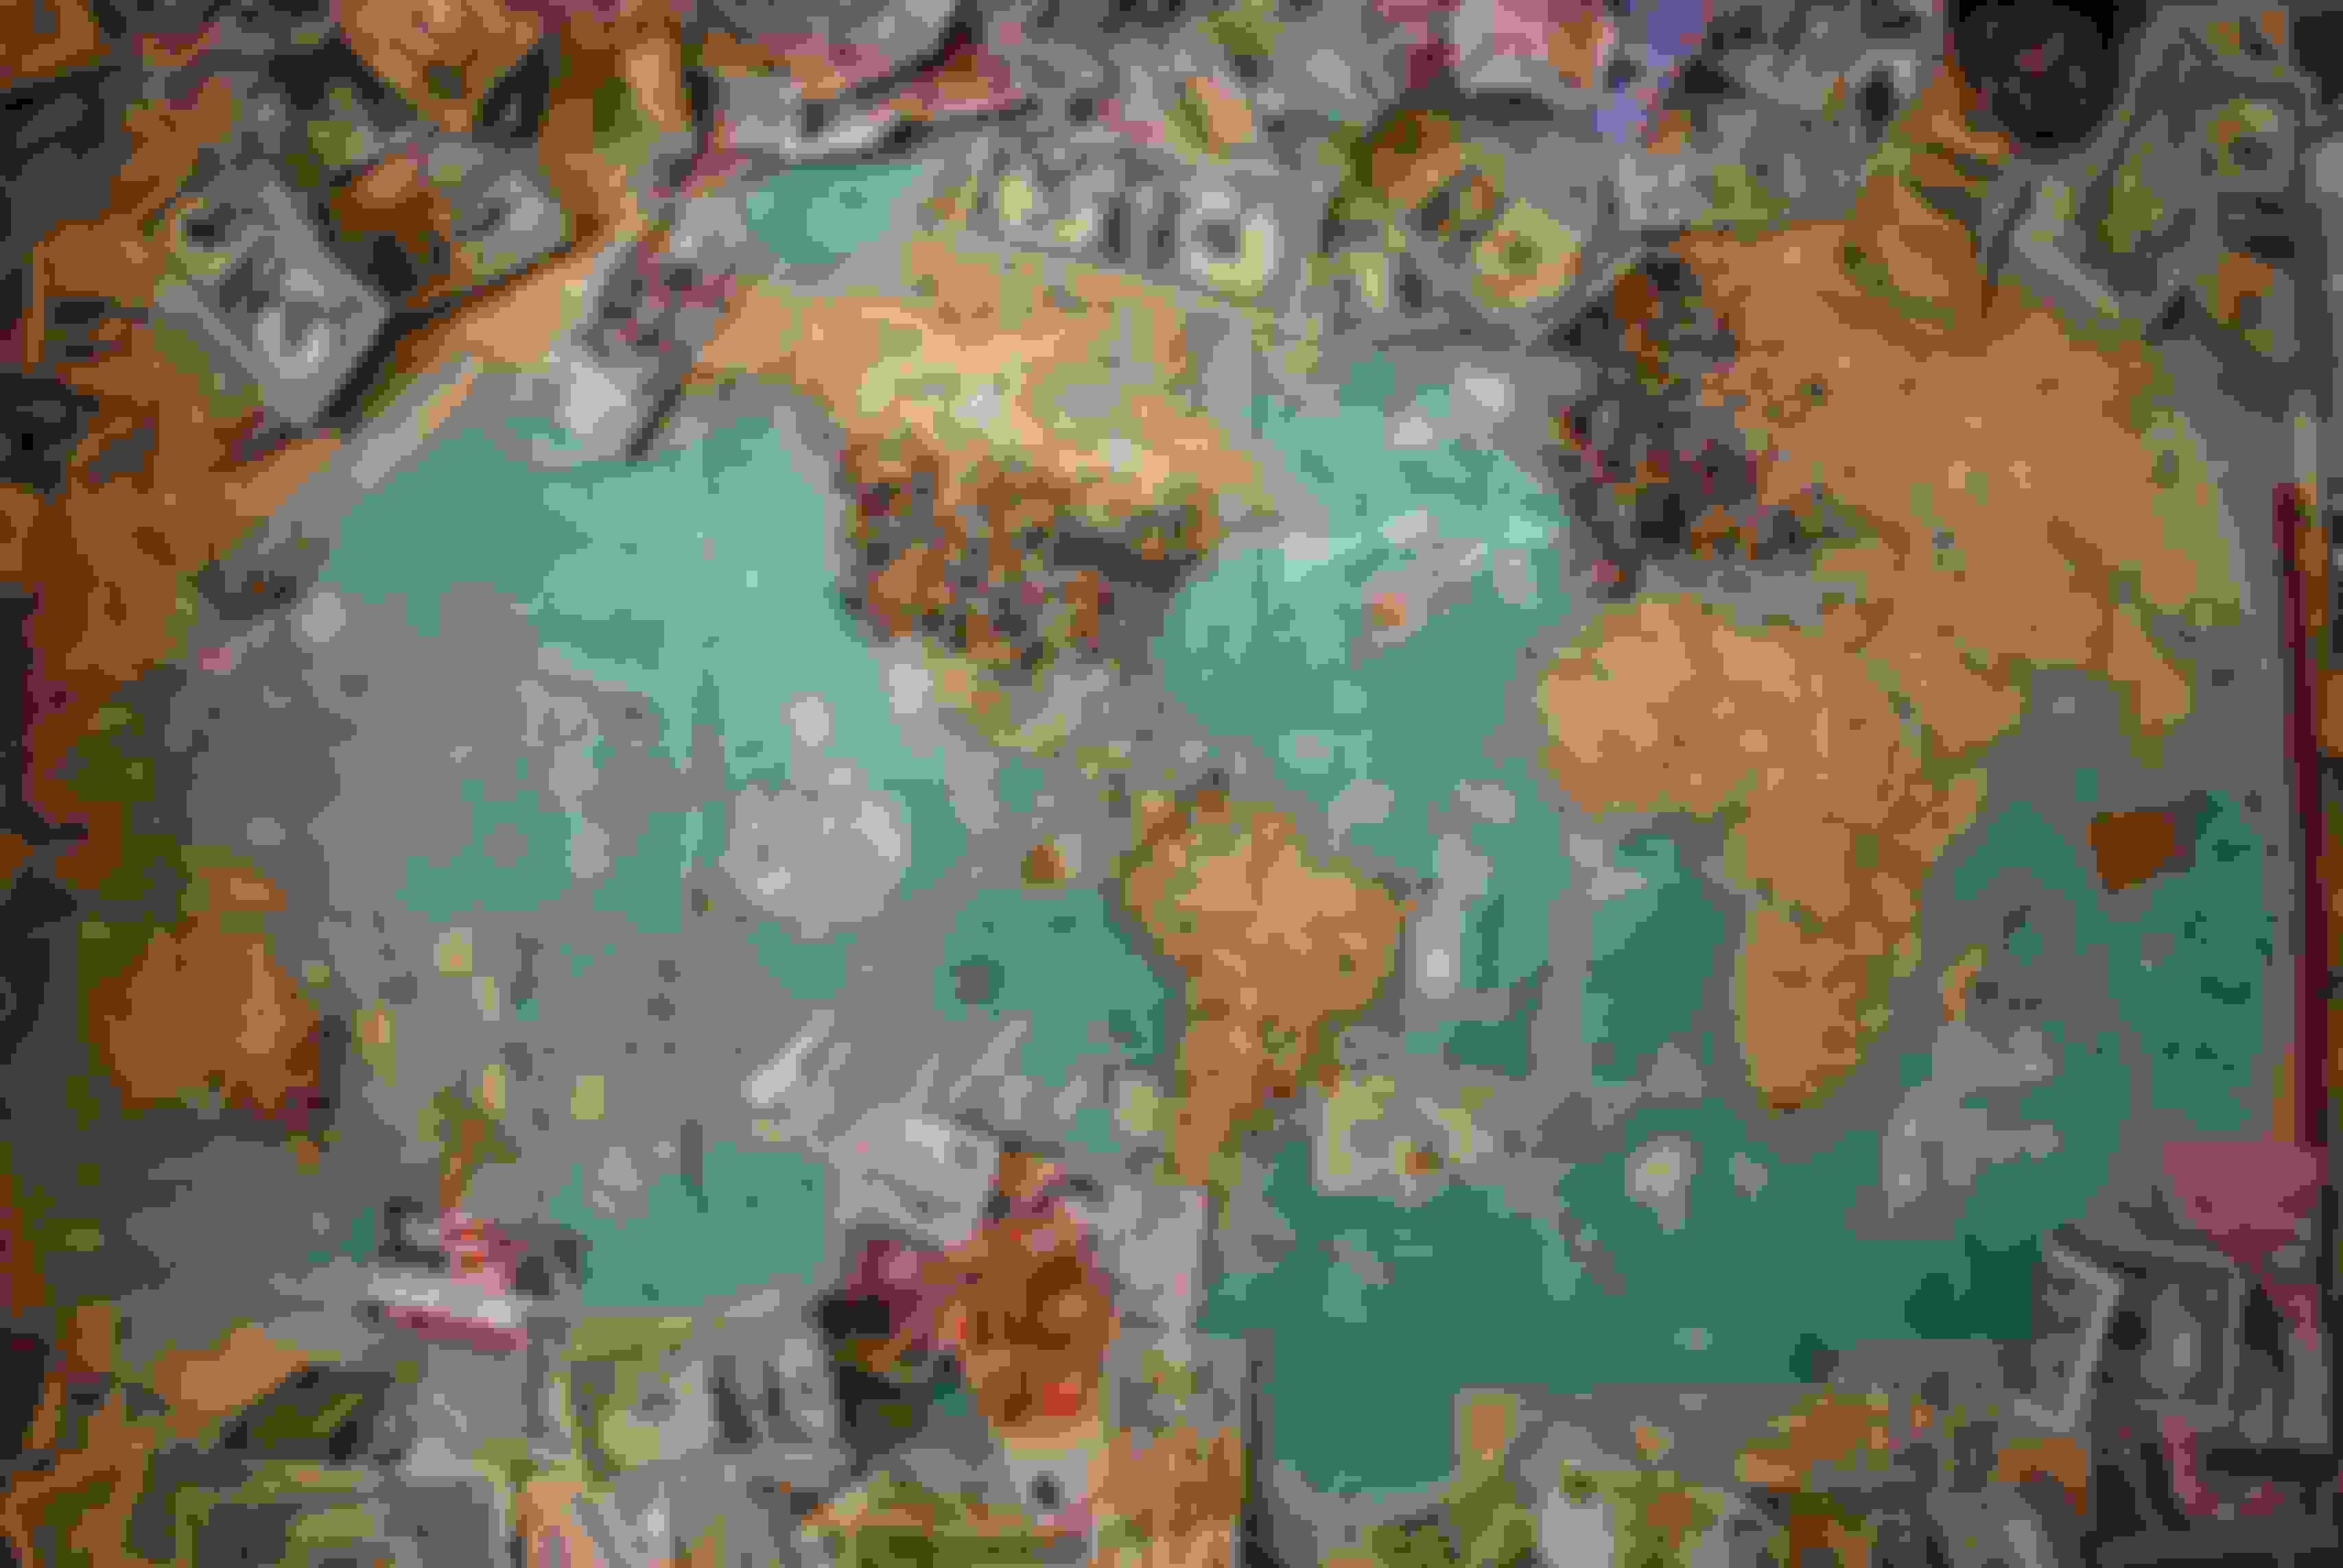 picture of world map with currency scattered around